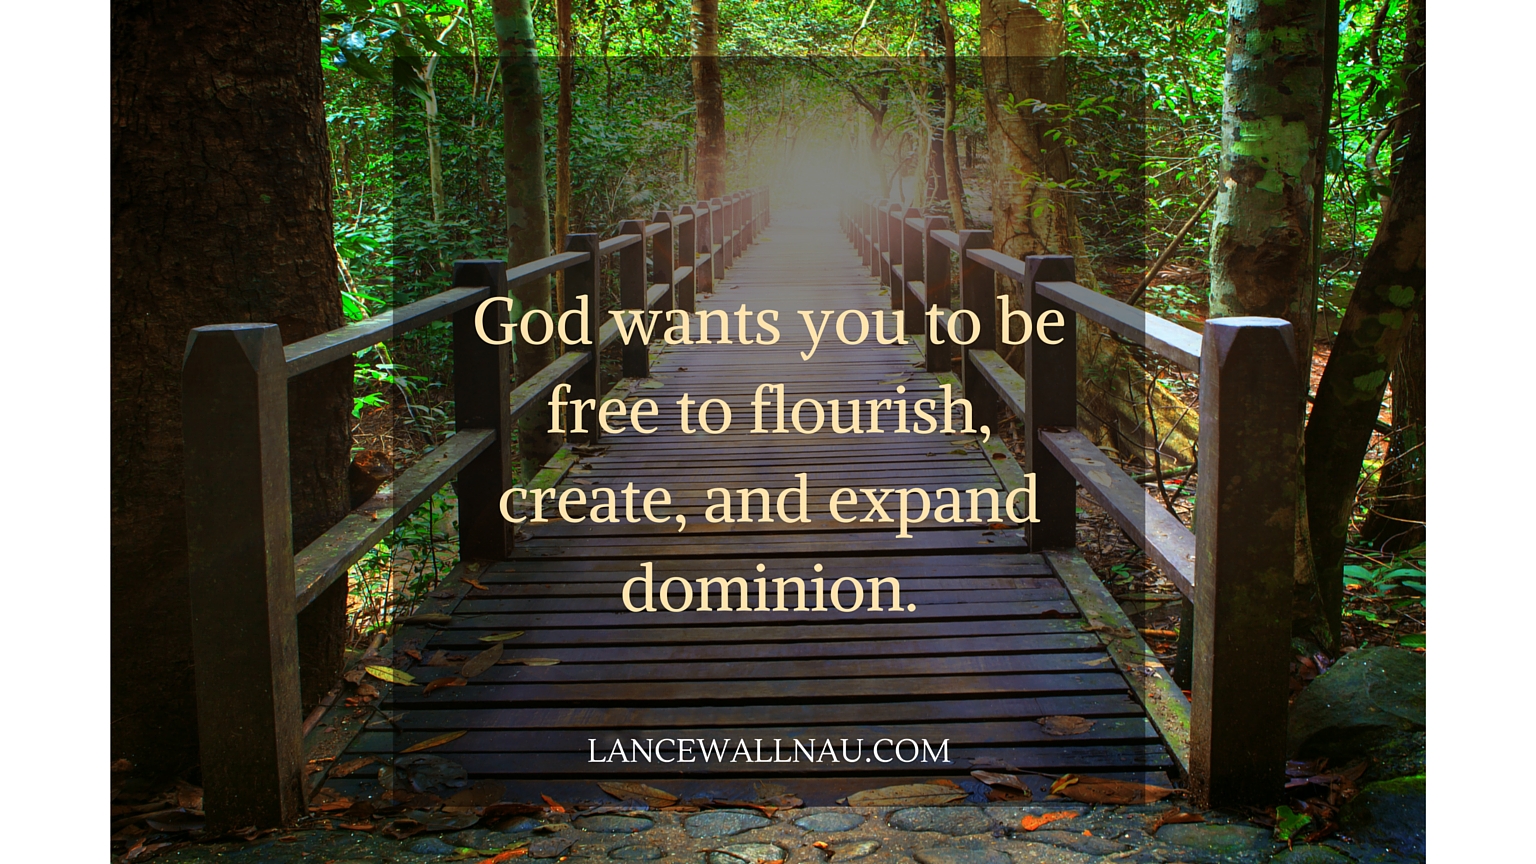 he-wants-you-to-be-free-to-flourish-create-and-expand-dominion